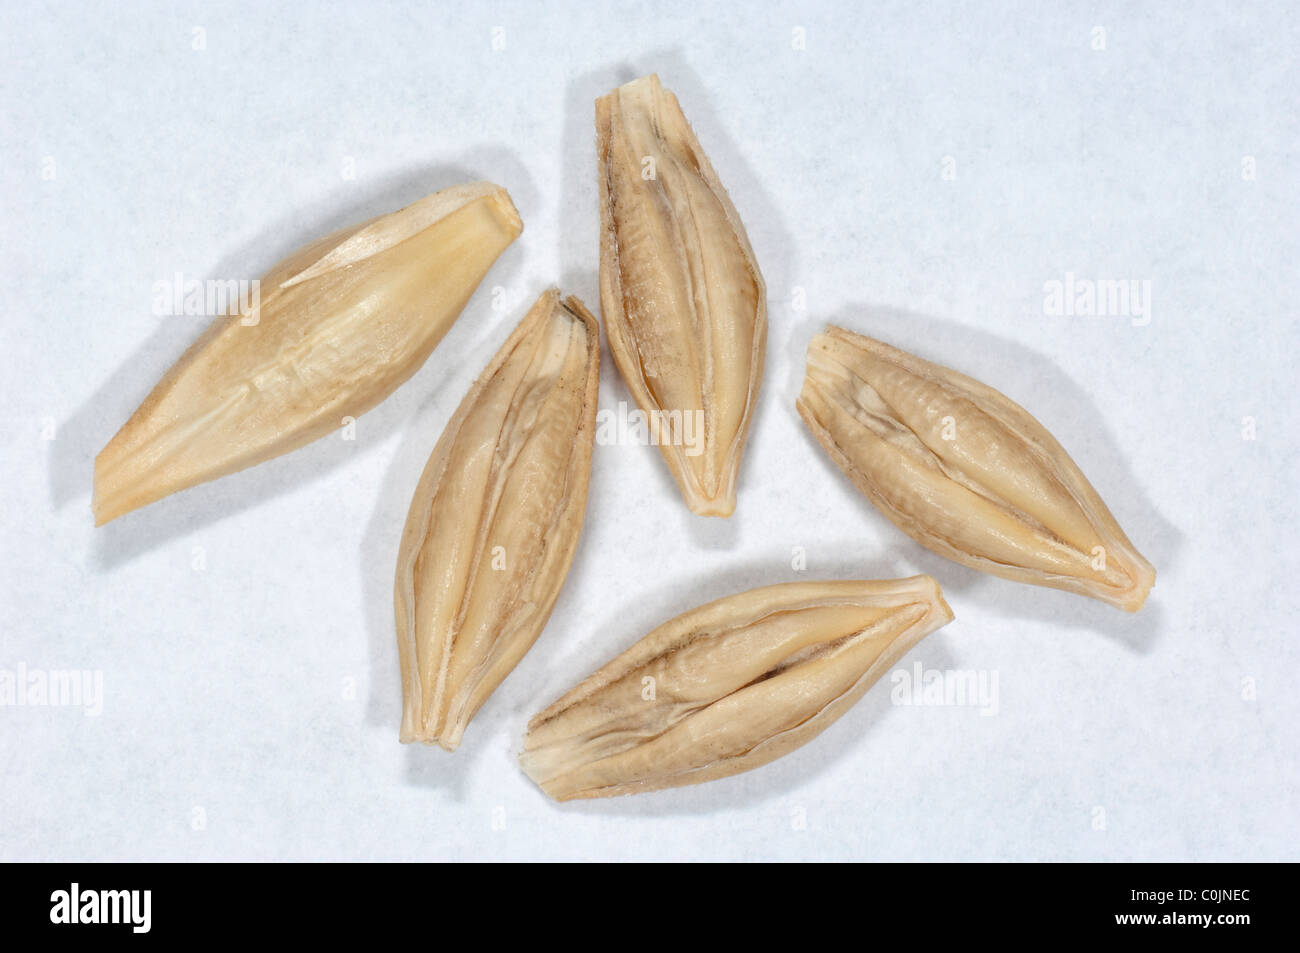 Barley (Hordeum vulgare), seeds. Studio picture against a white background. Stock Photo